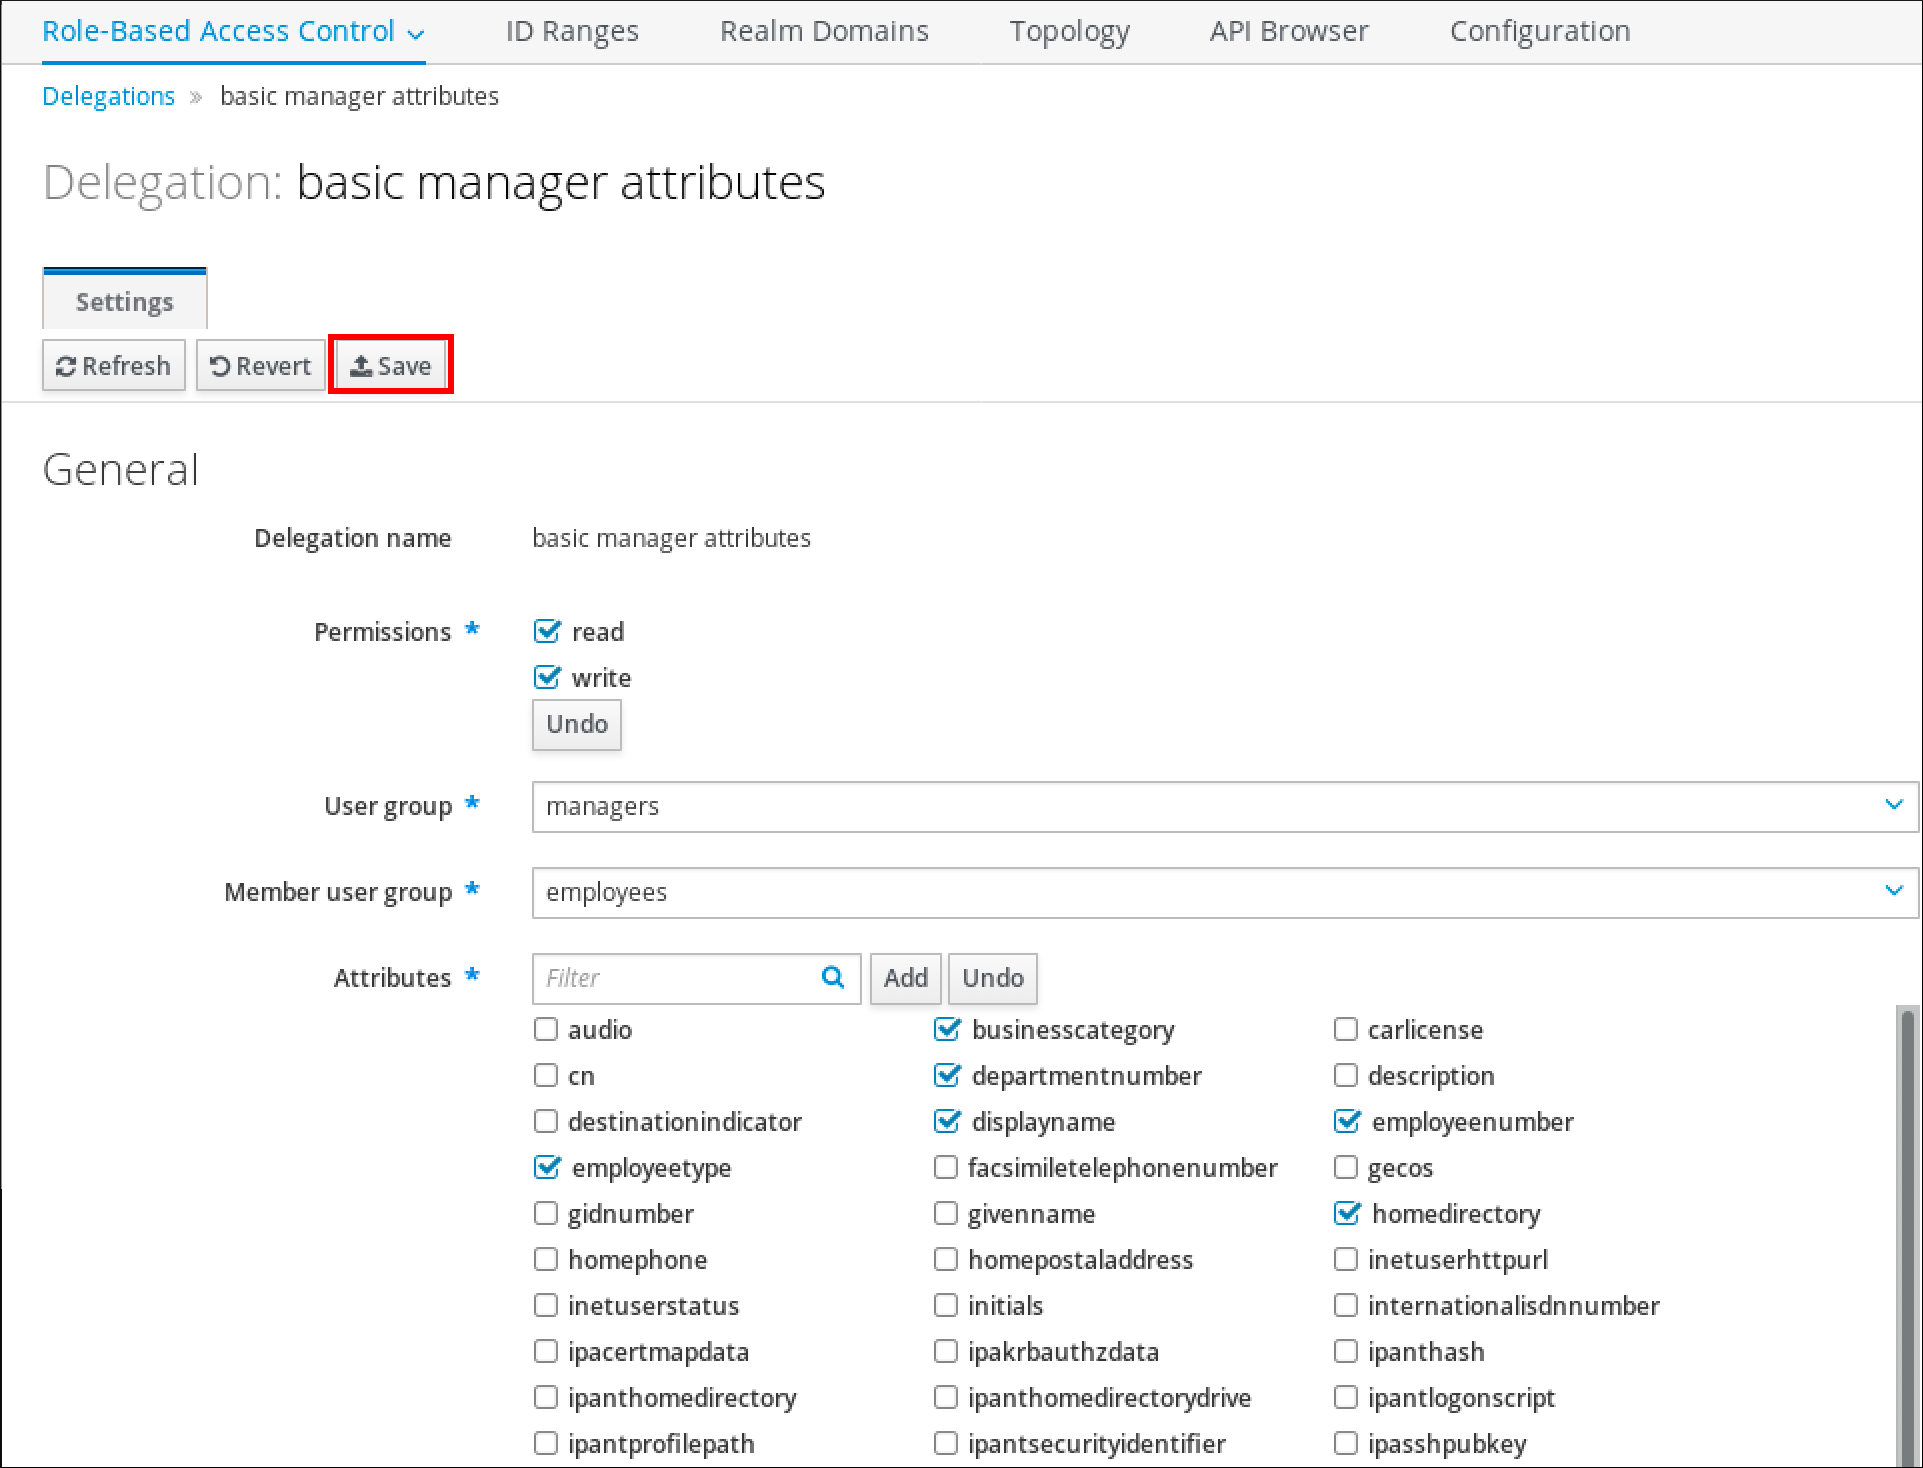 The Delegation page displays details of the "basic manager attributes" Delegation such as the Delegation name - Permissions (which is required - such as "read" and "write") - User group (required such as "managers") - Member user group (required such as "employees") and Attributes (required such as employeetype - businesscategory - departmentnumber - displayname - employeenumber - homedirectory). The "save" button at the top left is highlighted.